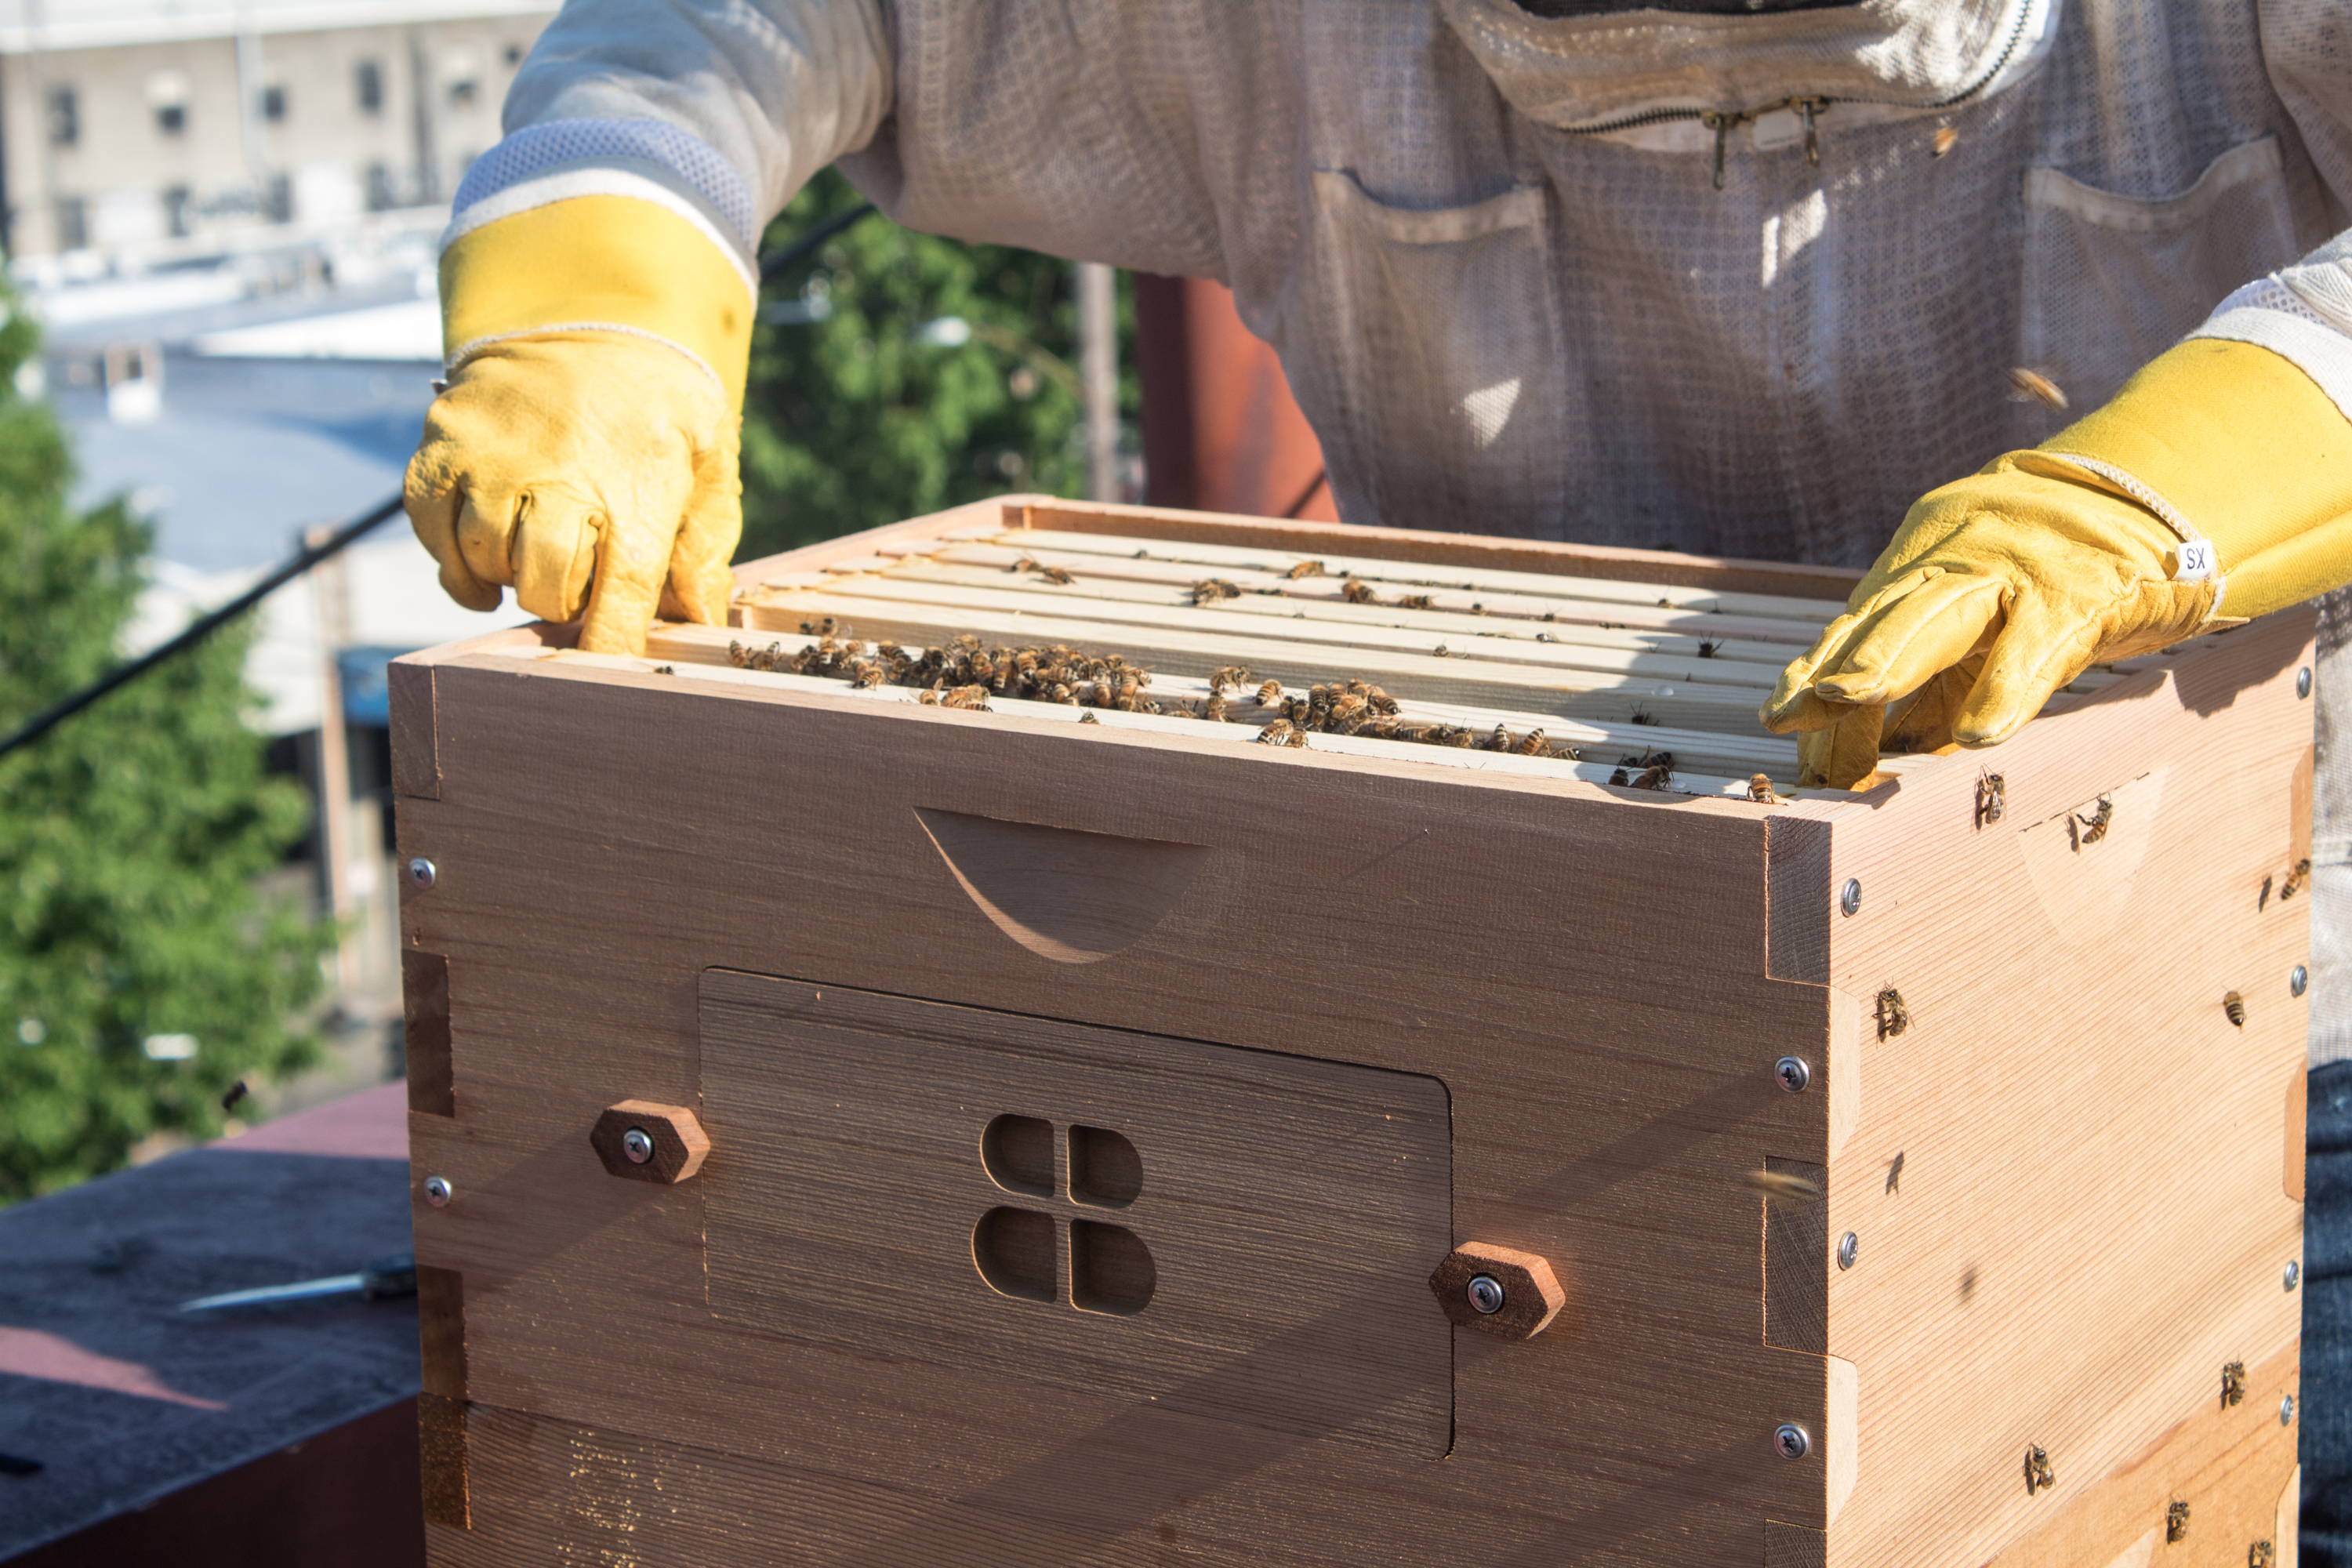 A Beekeeper with a Bee Built Langstroth hive.